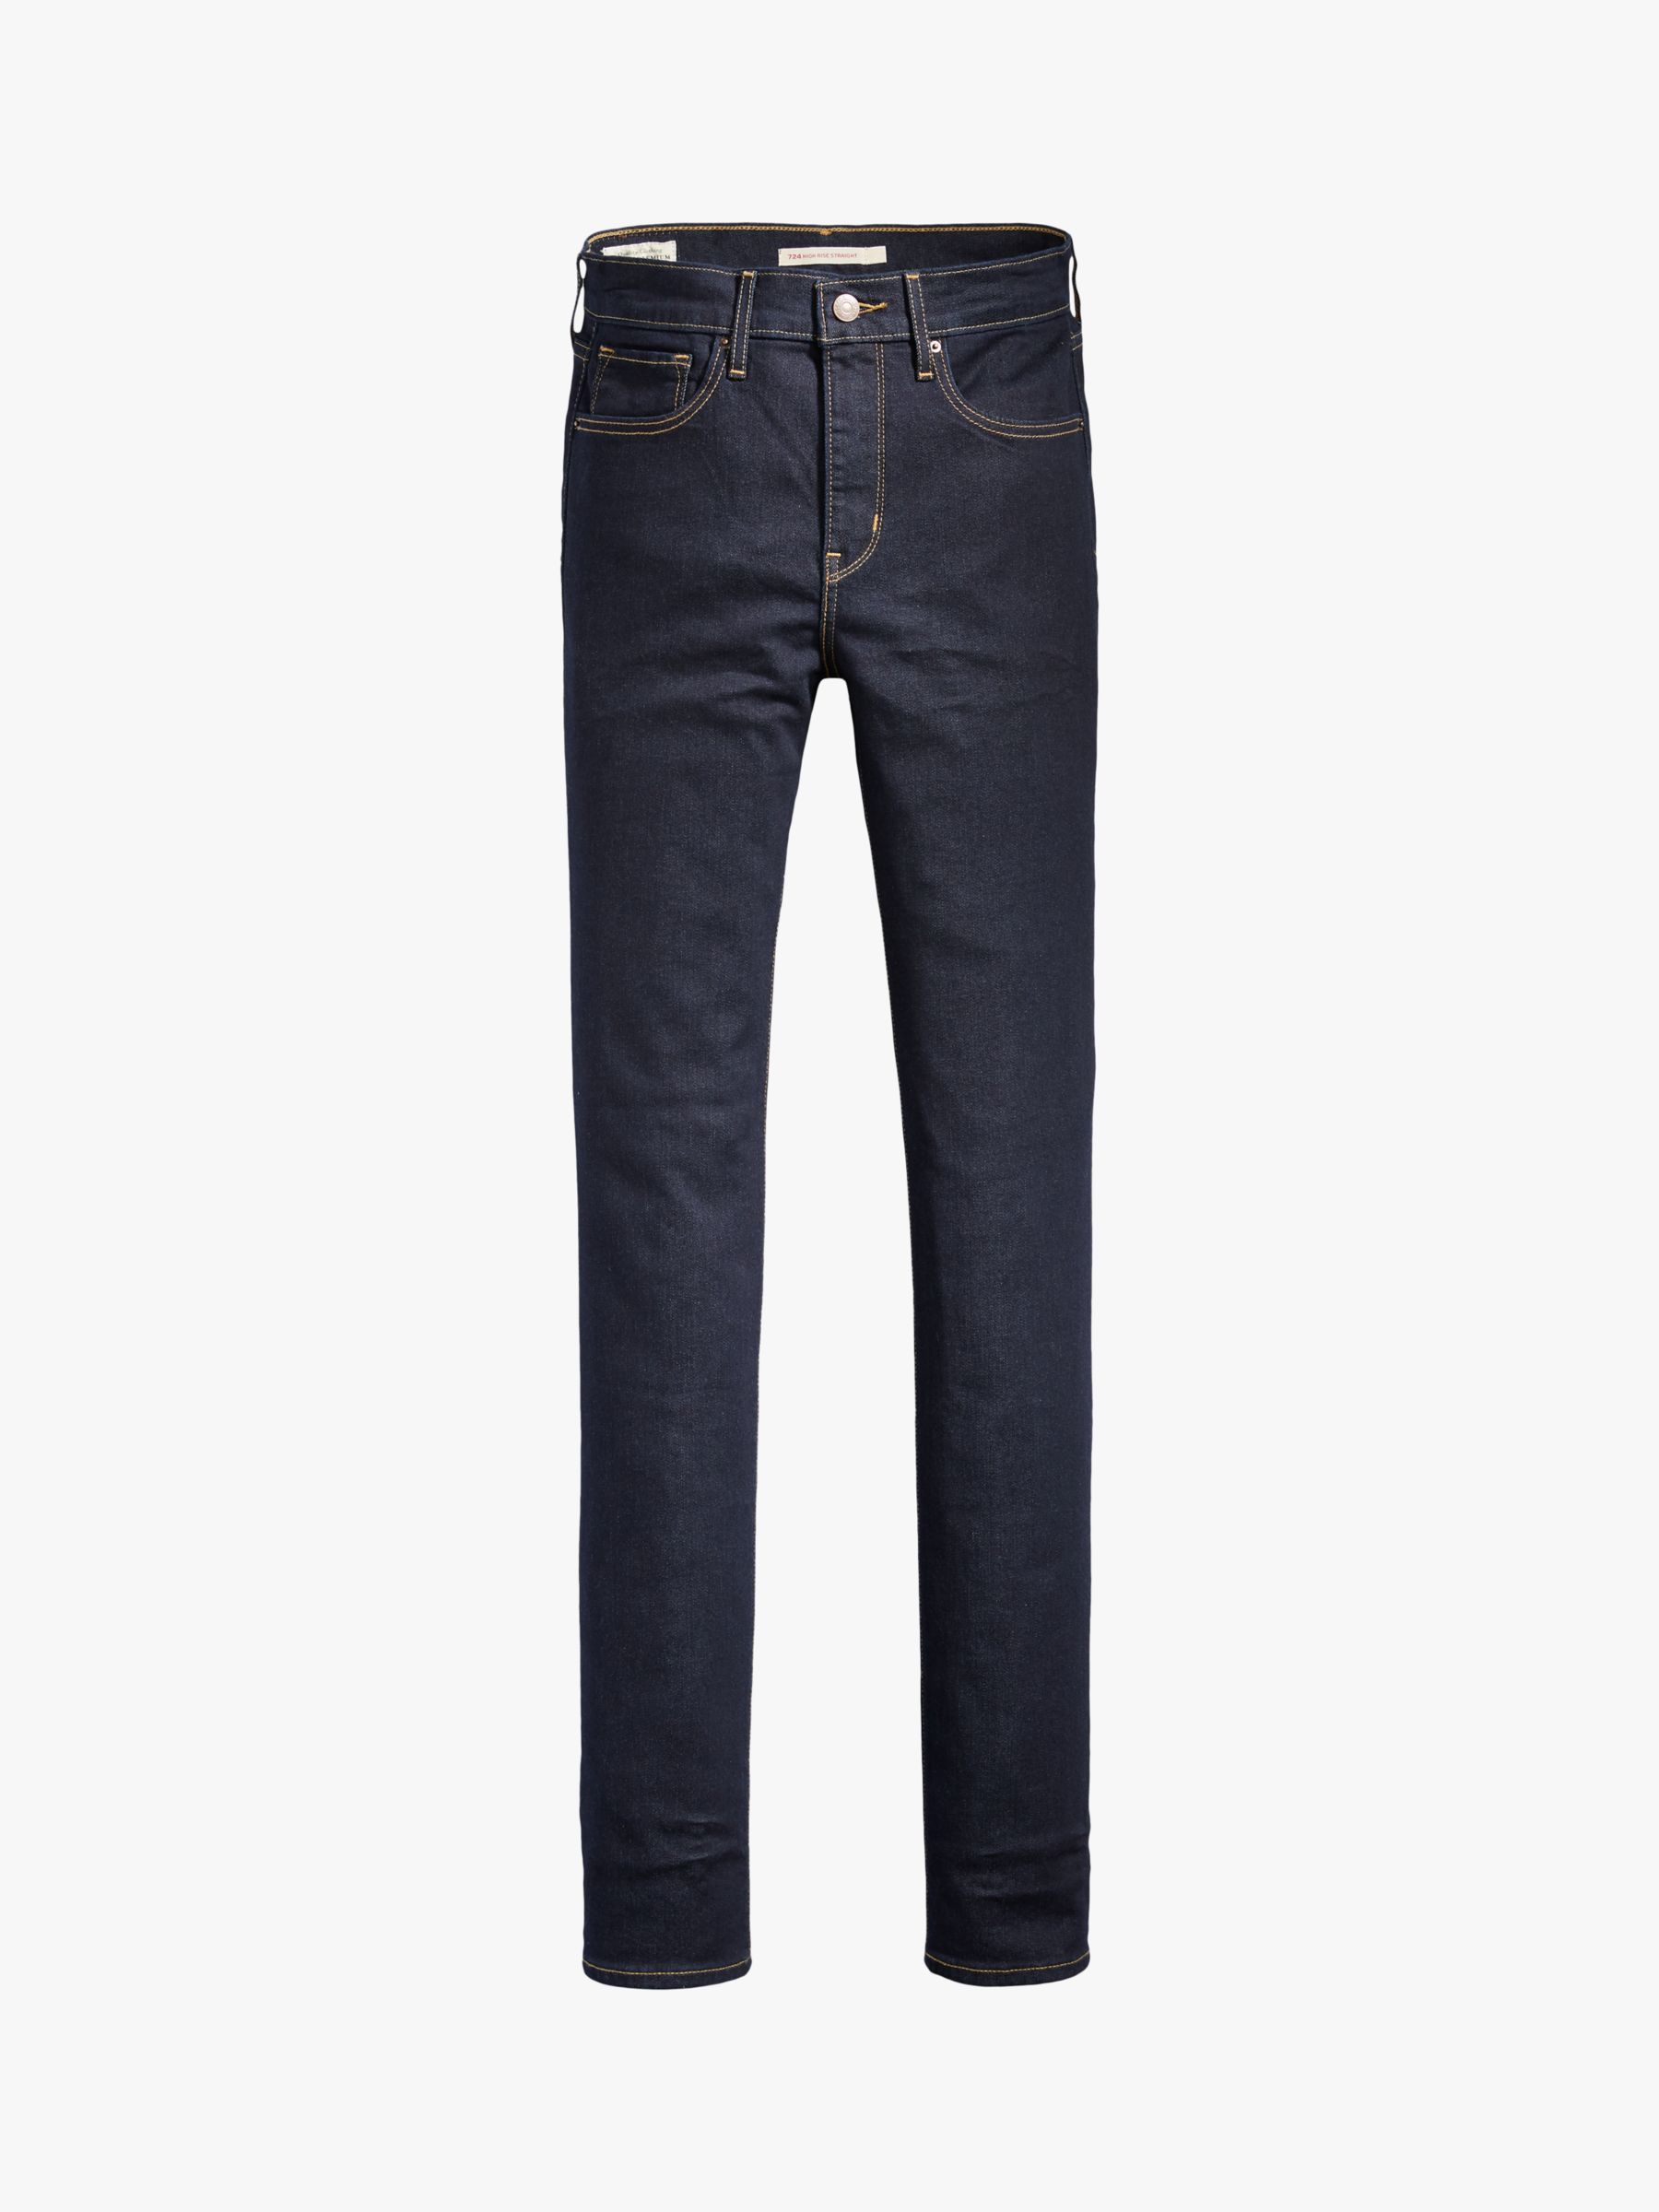 Levi's 724 High Rise Straight Cut Jeans, To The Nine, W24/L28